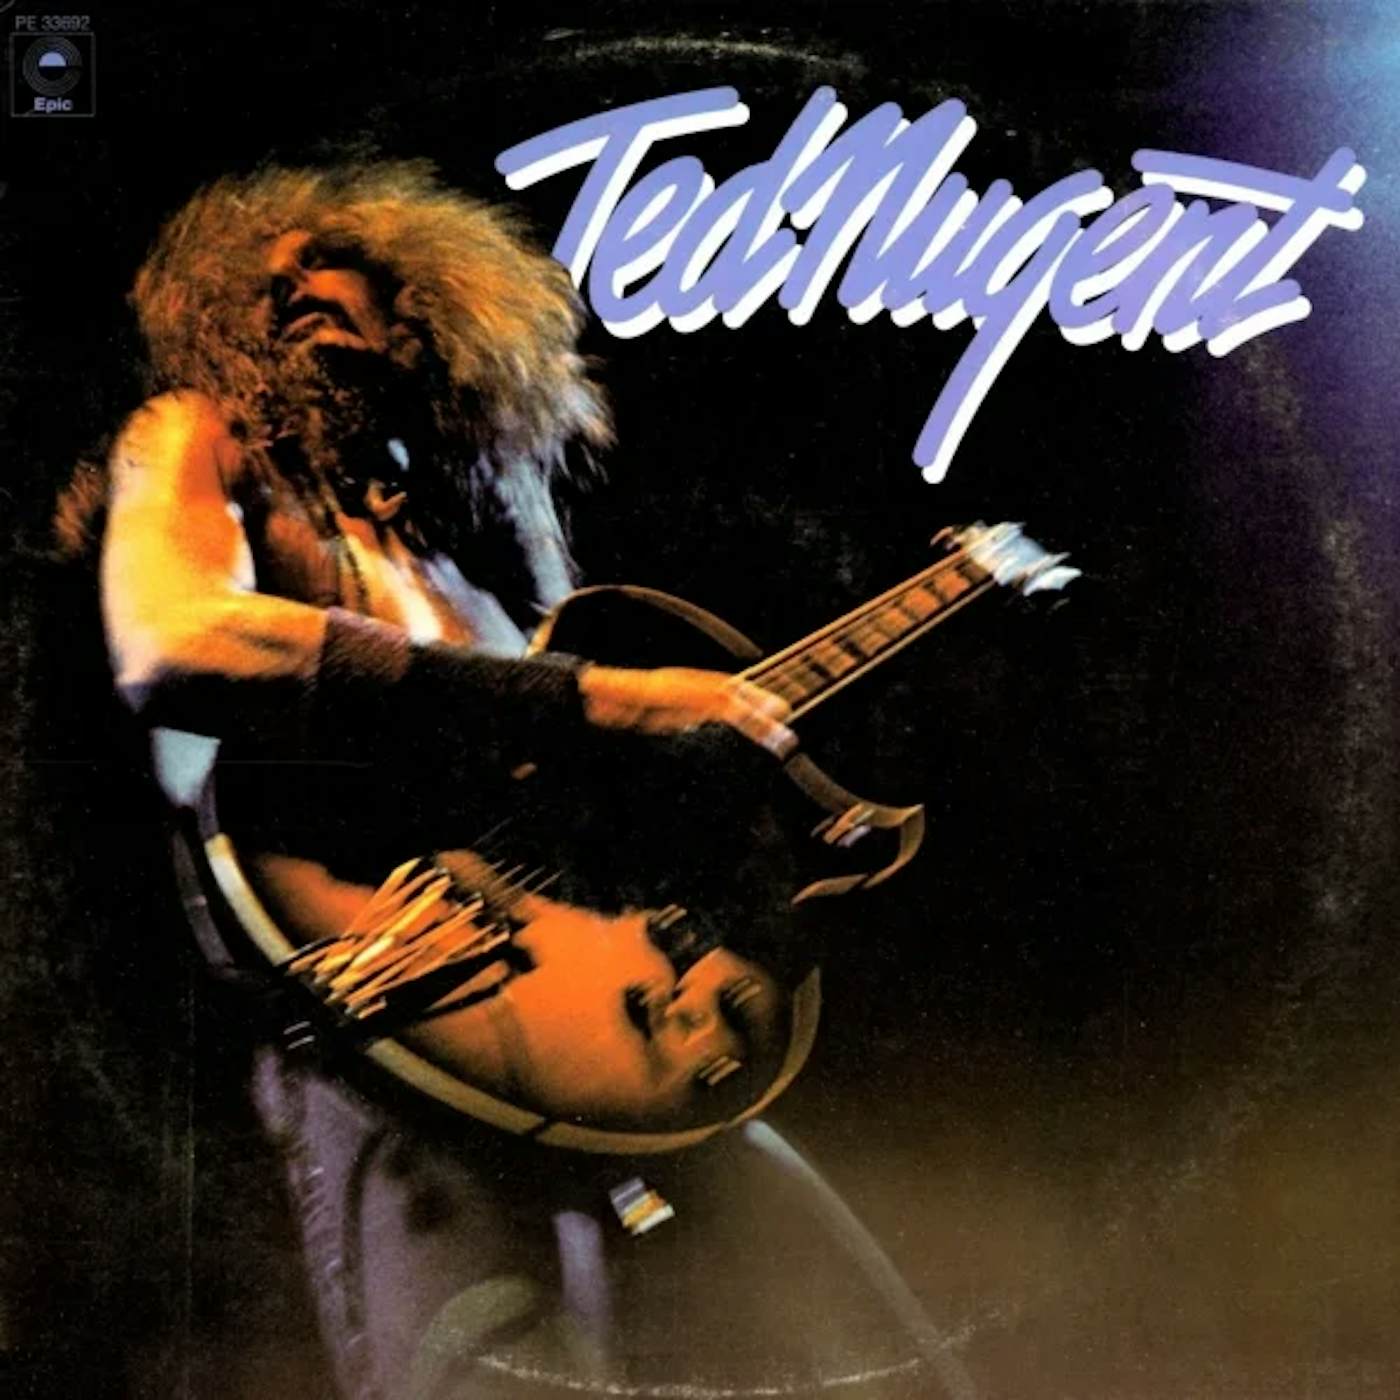 TED NUGENT CD